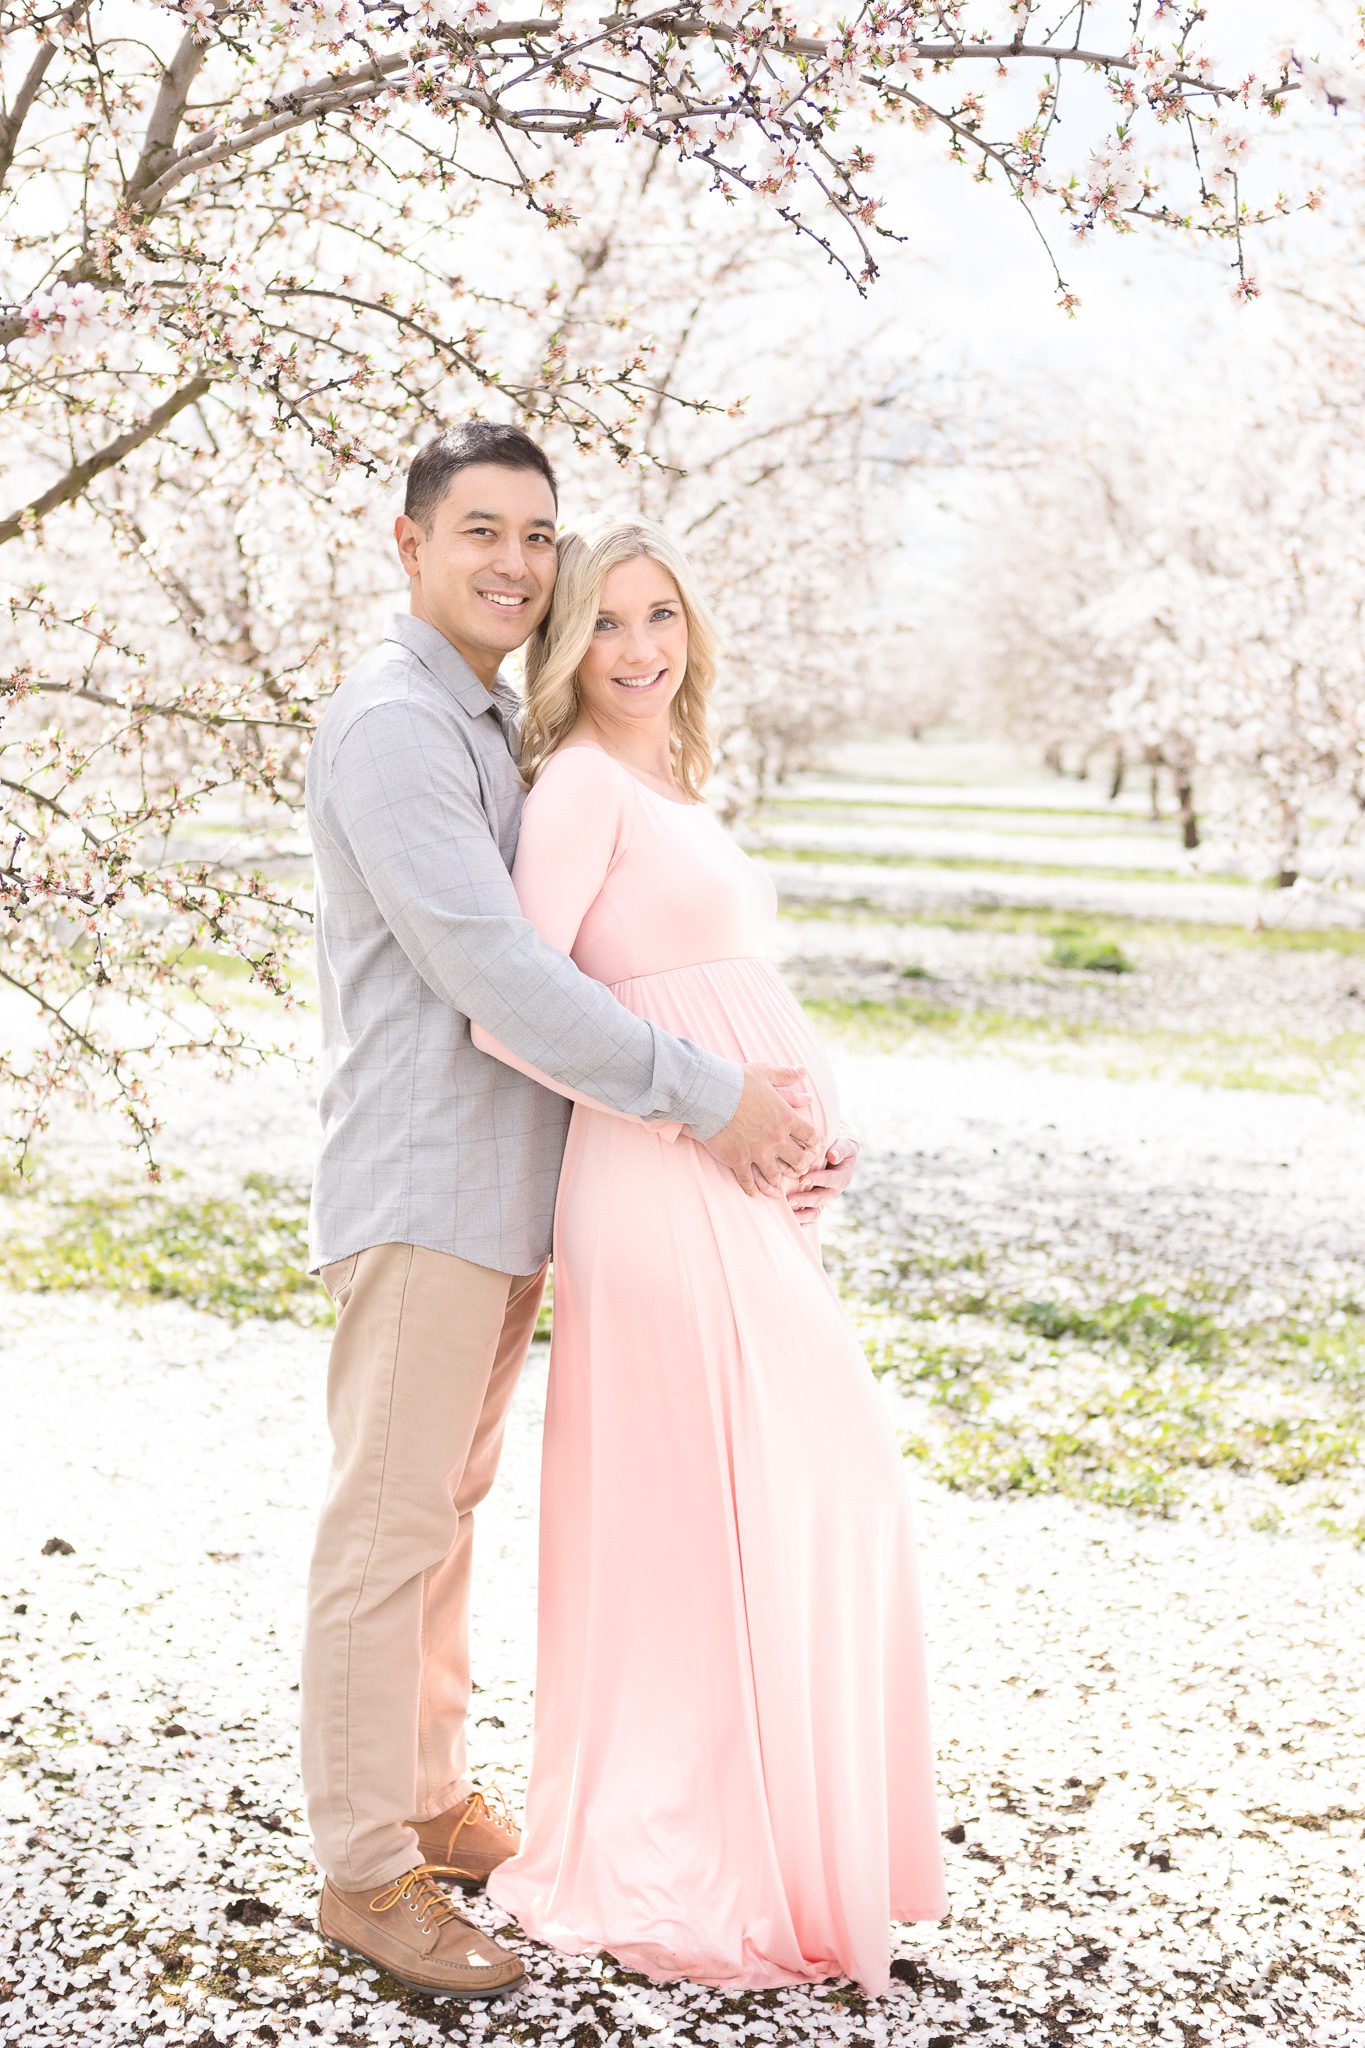 blossom maternity session, husbands arms wrapped around wives belly